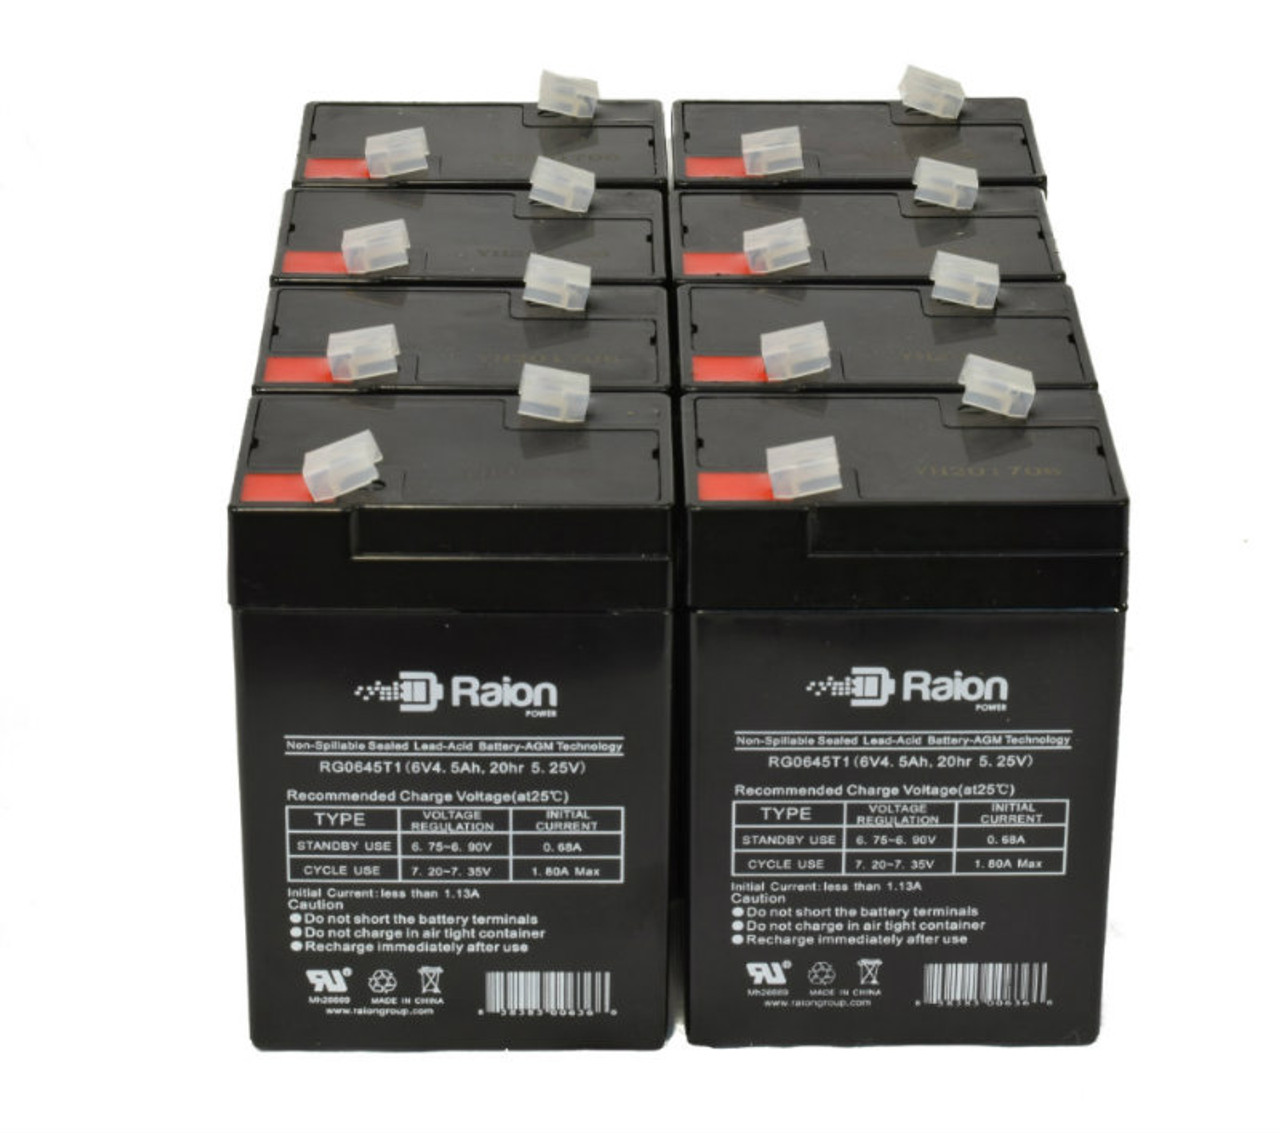 Raion Power 6 Volt 4.5Ah RG0645T1 Replacement Battery for Weiboer GB6-4 - 8 Pack